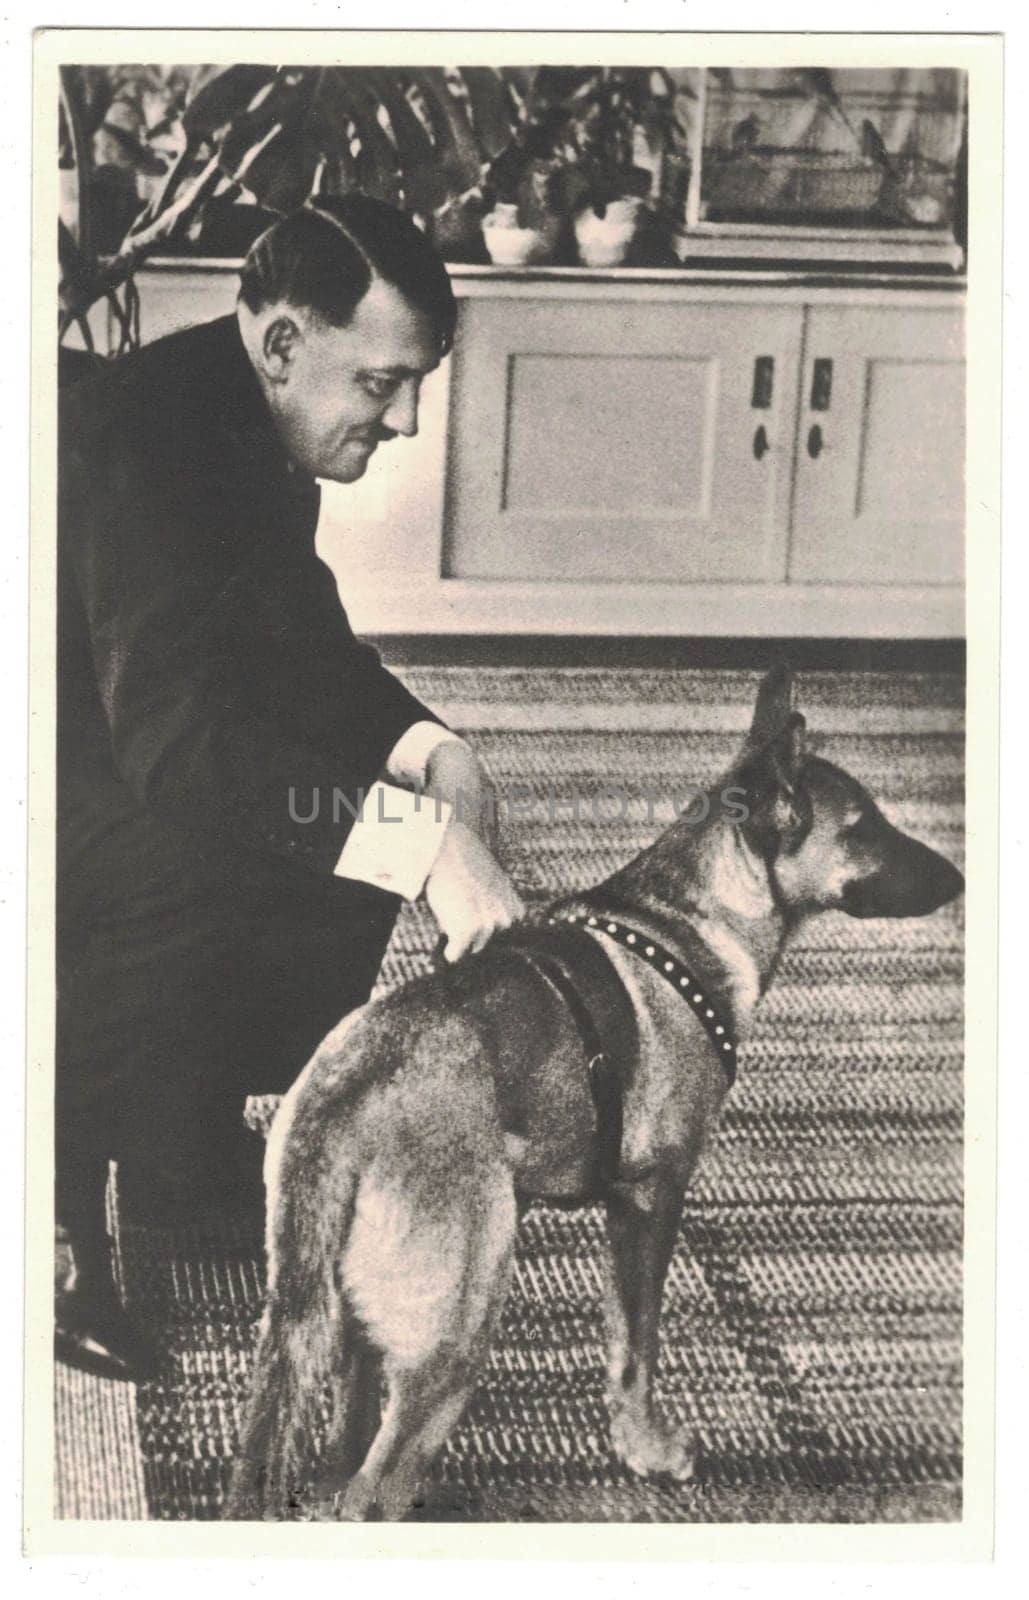 Adolf Hitler and his dog. Hitler was leader of nazi Germany. Reproduction of antique photo. by roman_nerud